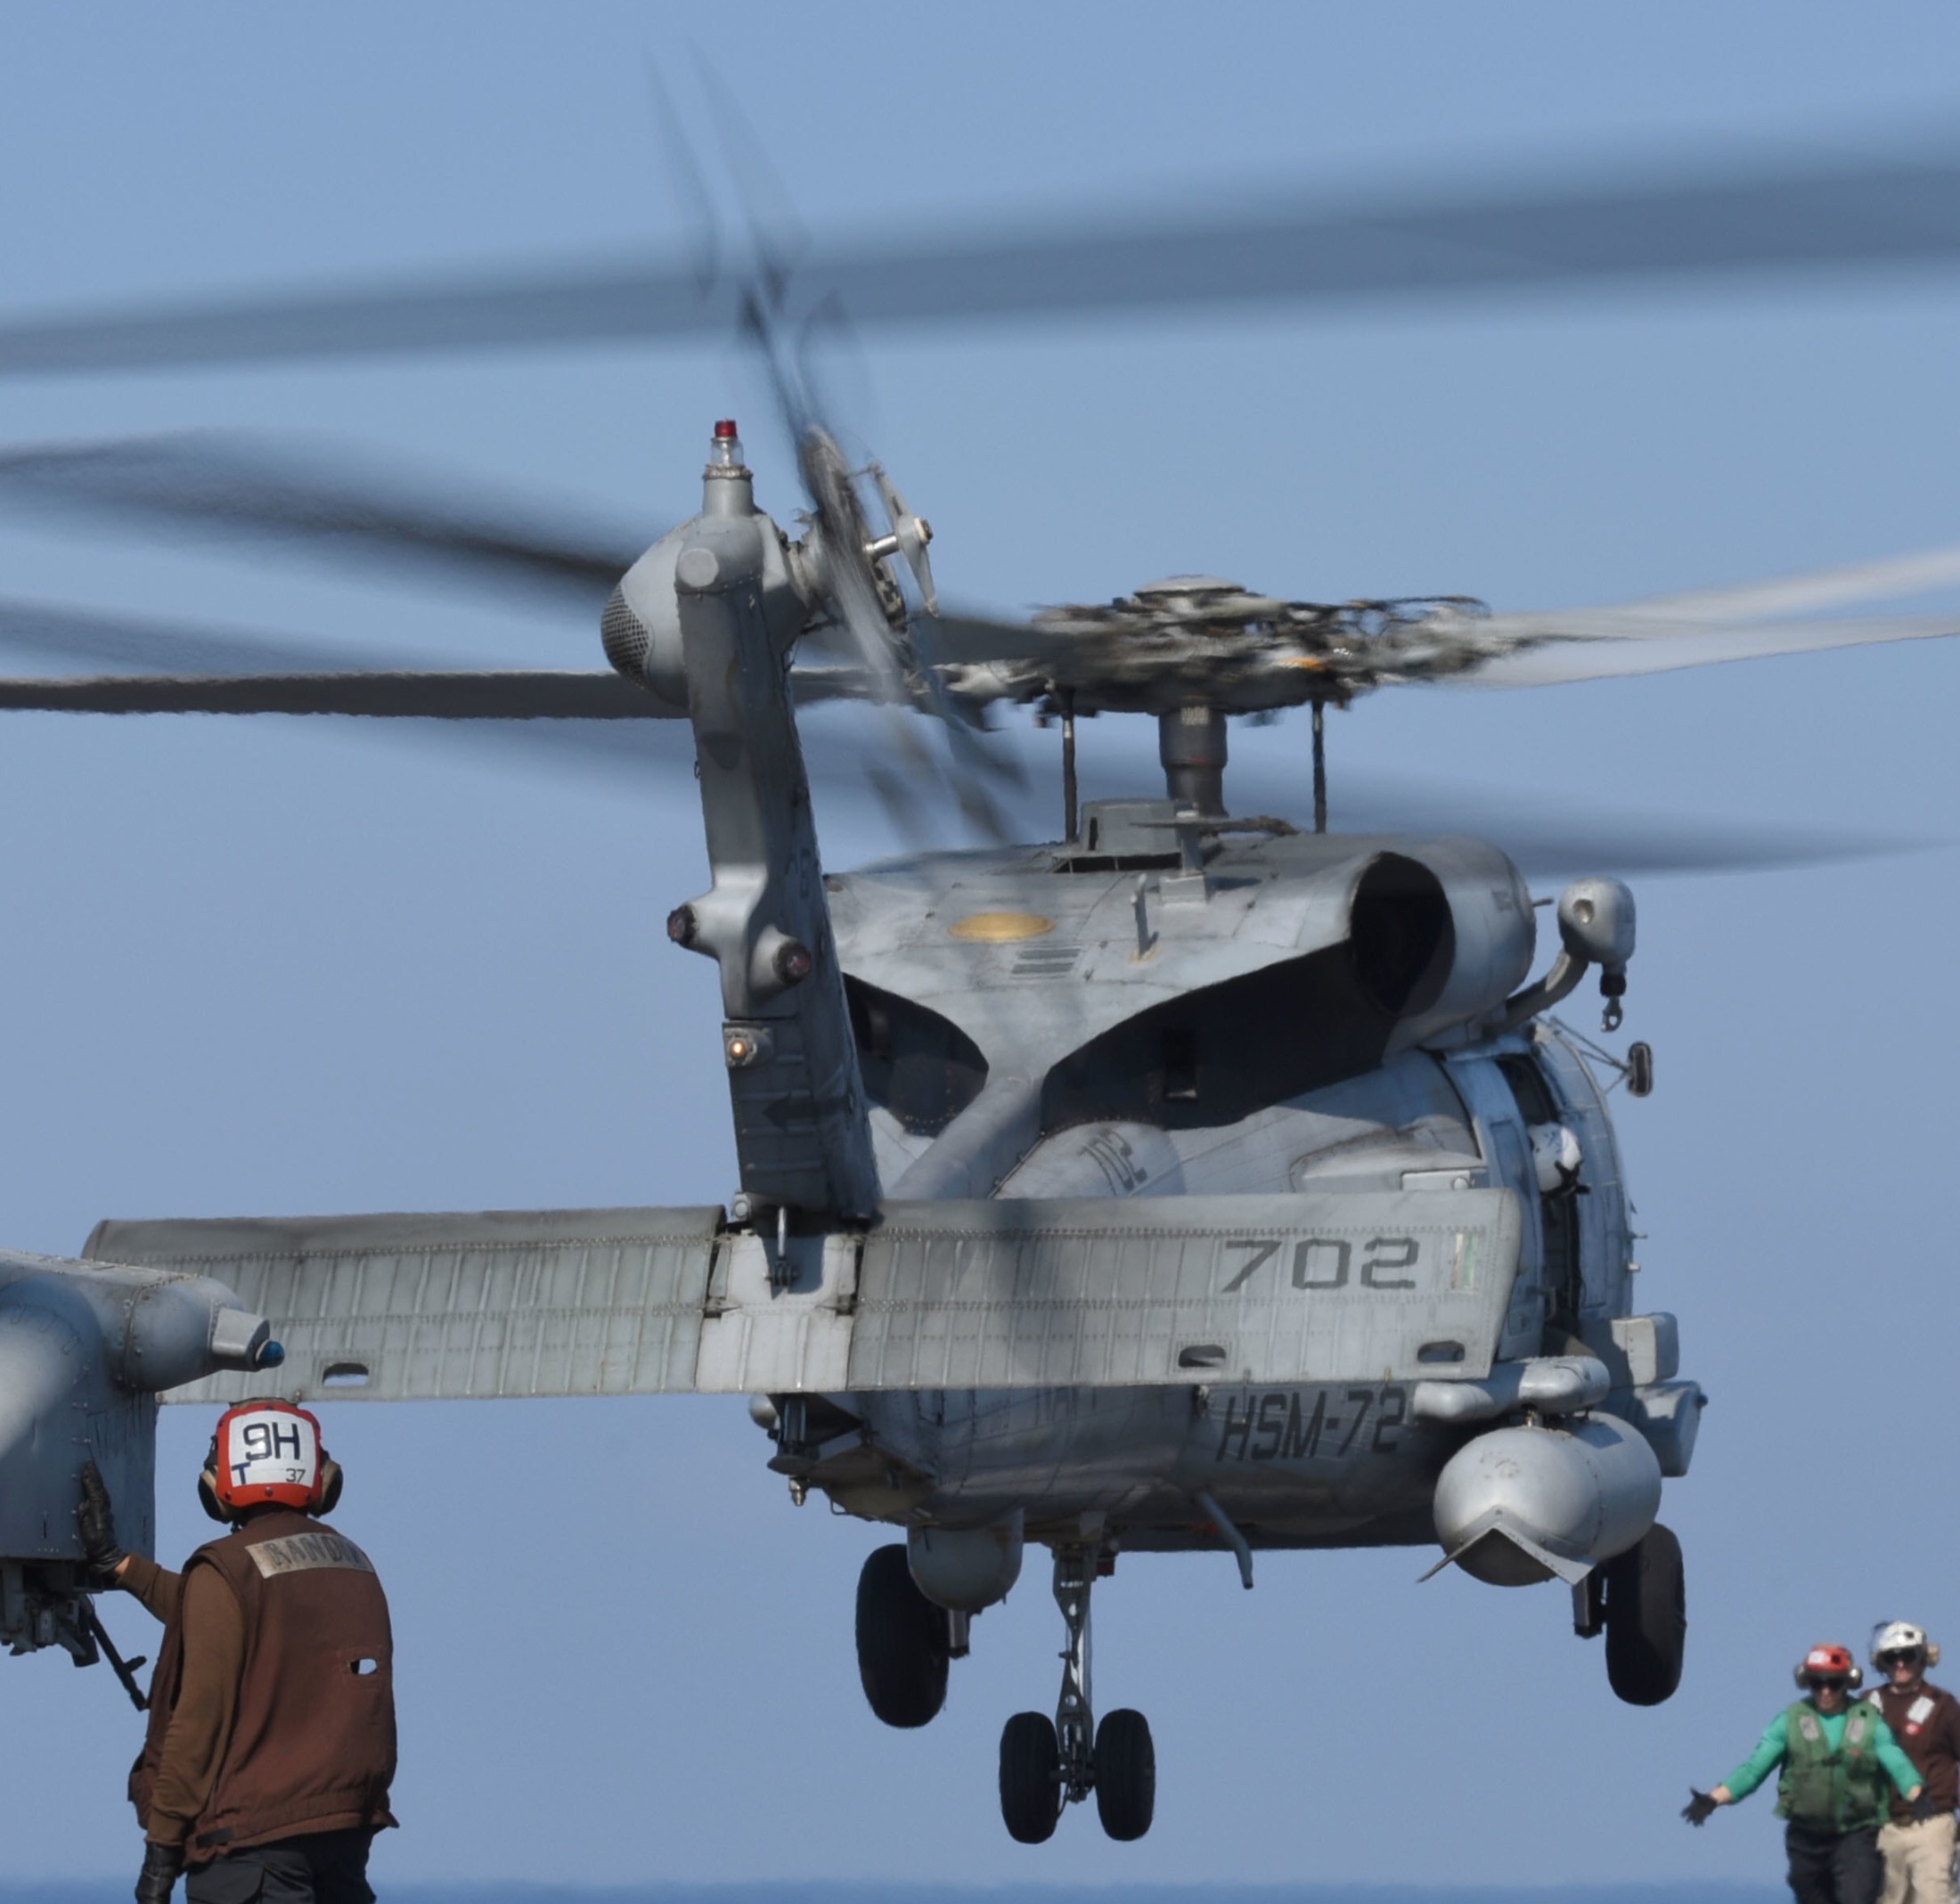 hsm-72 proud warriors helicopter maritime strike squadron mh-60r seahawk carrier air wing cvw-1 cvn-75 uss harry s. truman 23